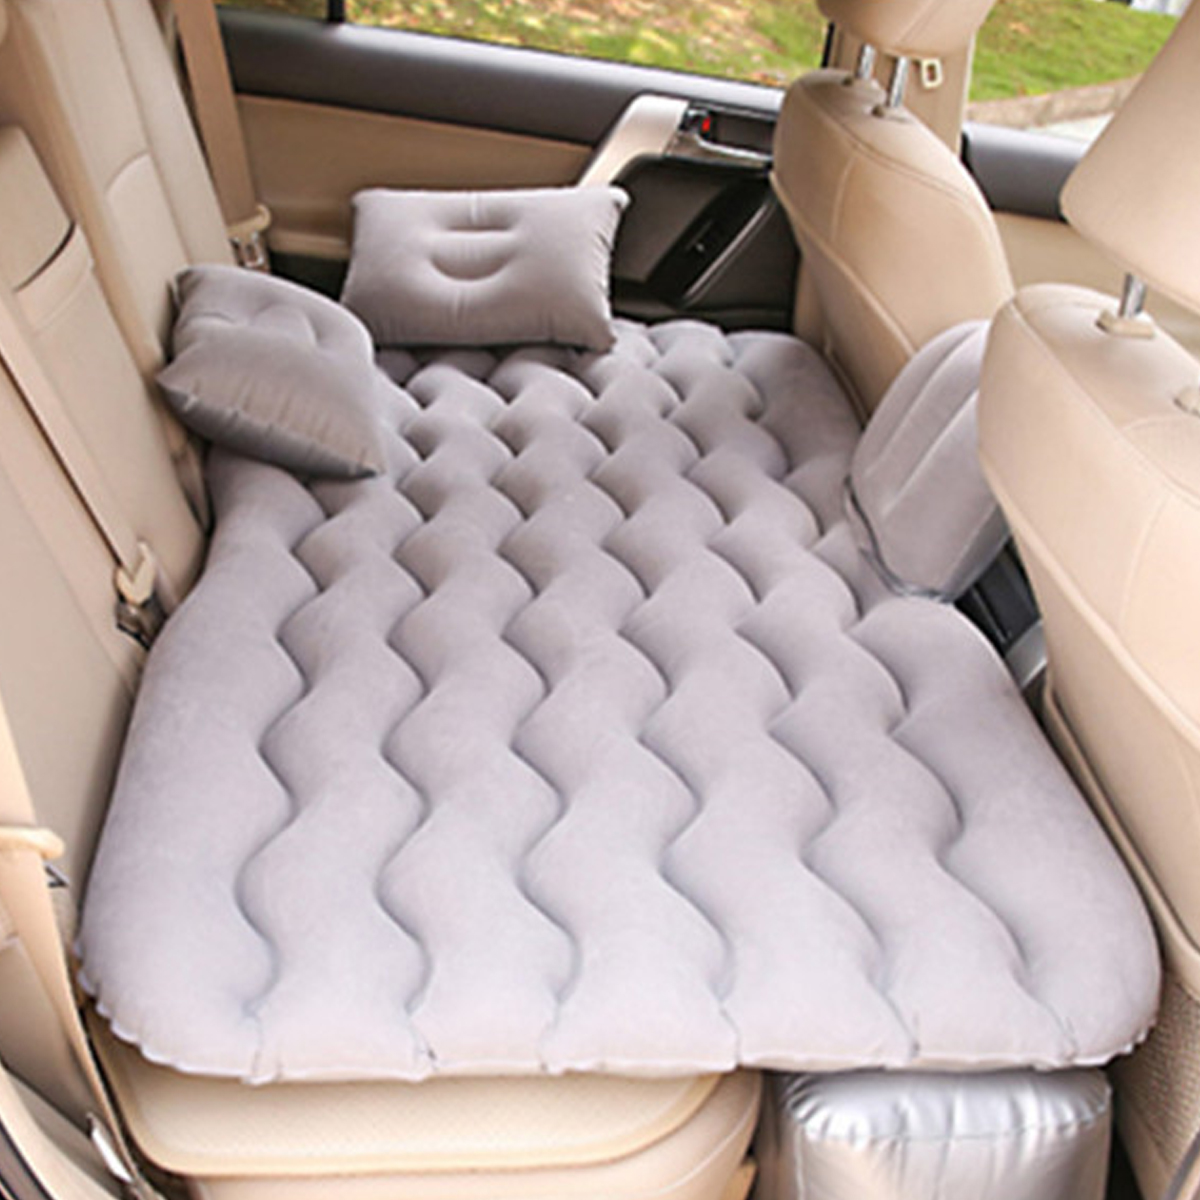 Car-Inflatable-Mat-Outdoor-Traveling-Air-Mattresses-Camping-Folding-Sleeping-Bed-with-Pillows-and-Pu-1612981-7